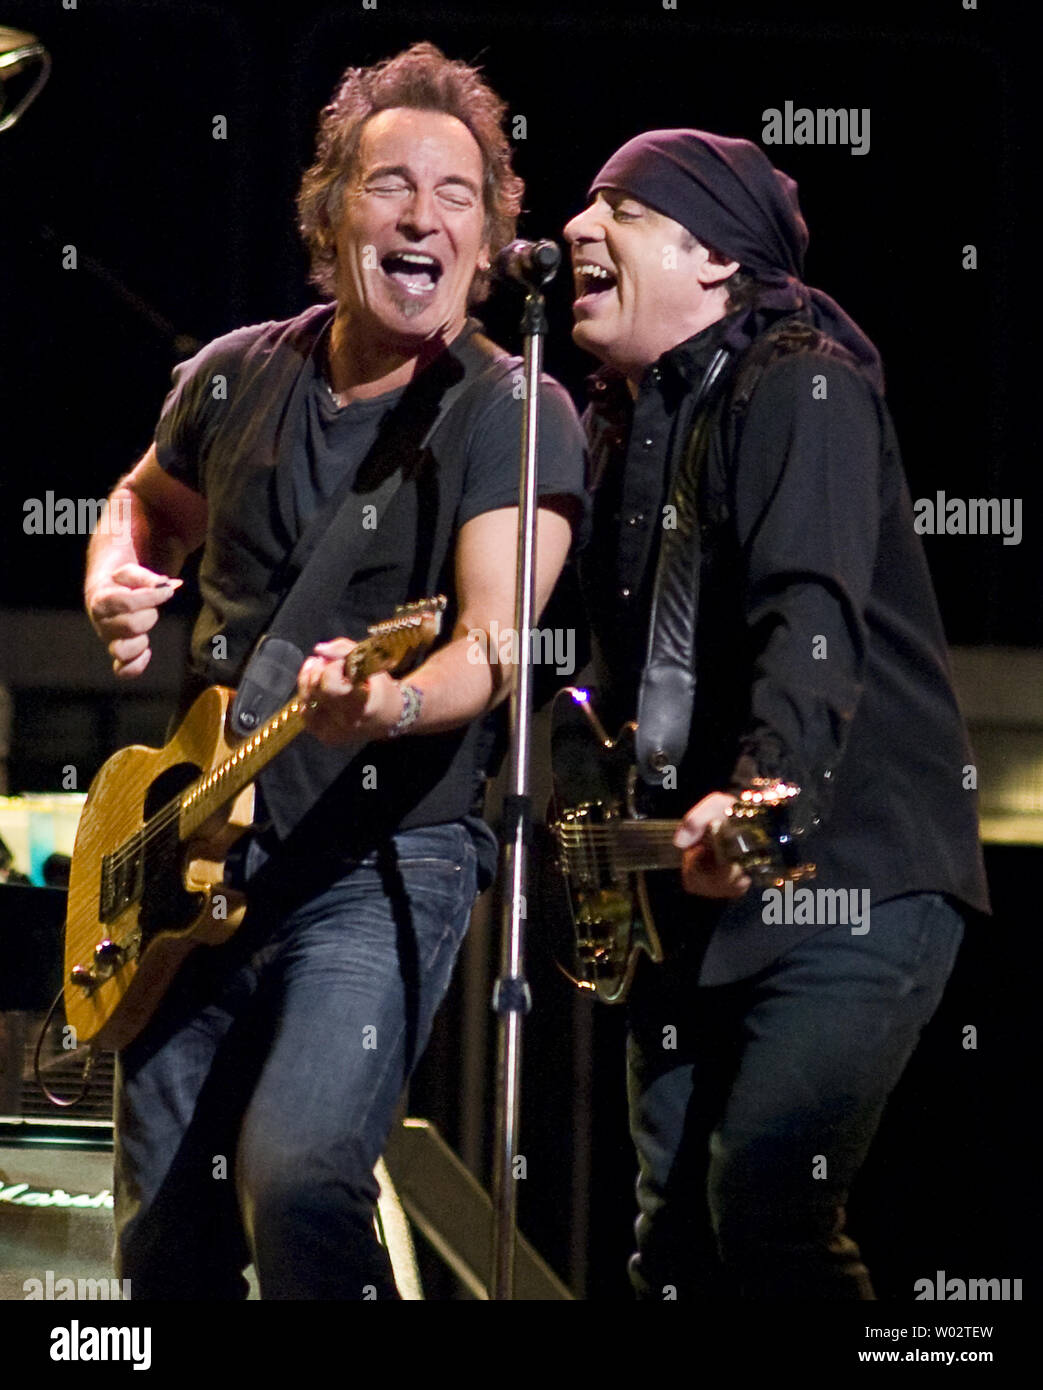 Bruce Springsteen (L) and Steven Van Zandt of the E Street Band perform " Radio Nowhere" from the Magic Album at the Key Arena in Seattle on March  29, 2008. The band is